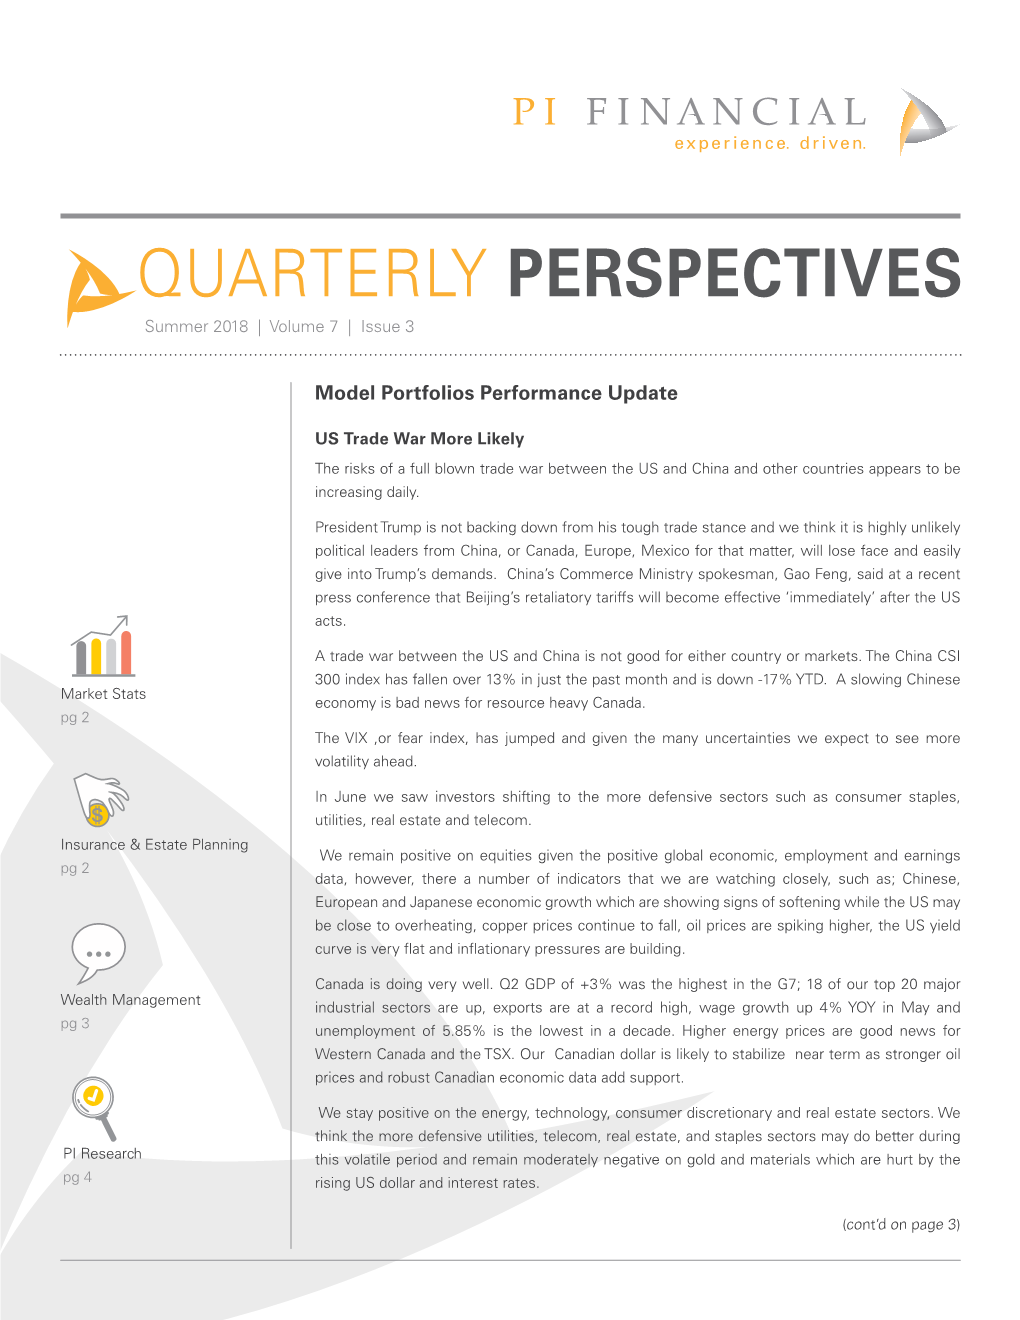 QUARTERLY PERSPECTIVES Summer 2018 | Volume 7 | Issue 3